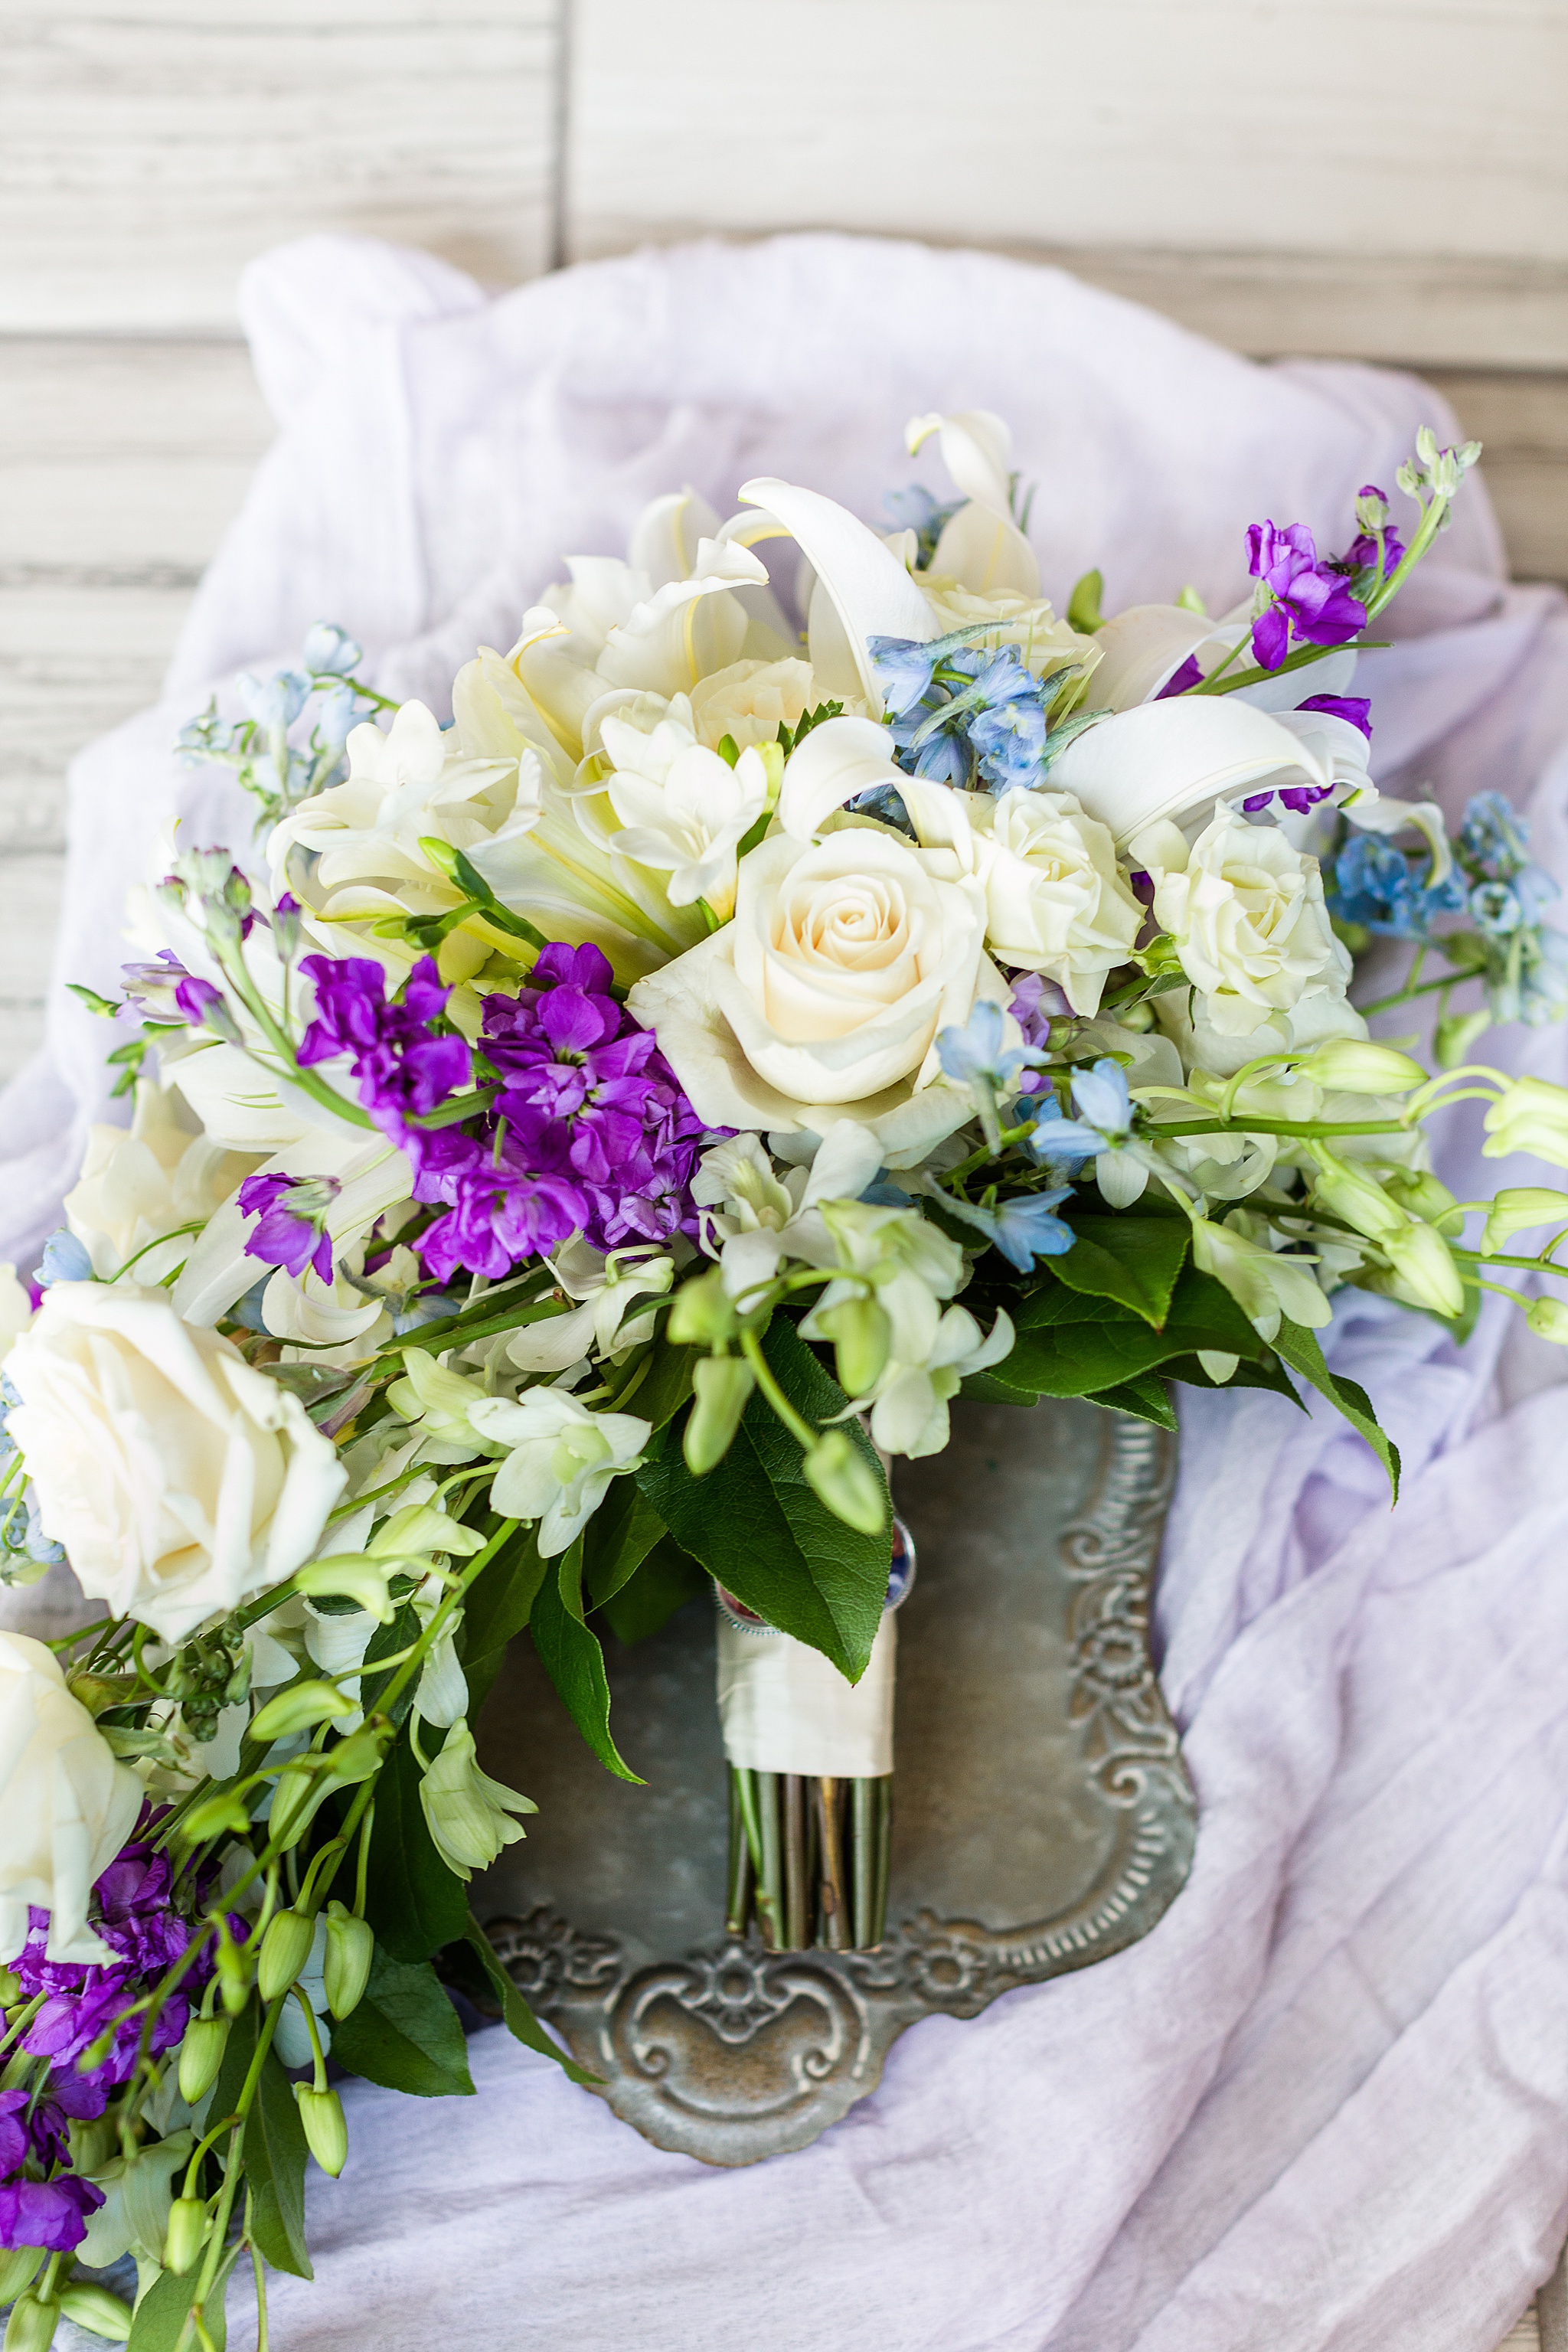 Ann's Gardens wedding bouquet photographed by MD wedding photographer Alexandra Mandato Photography